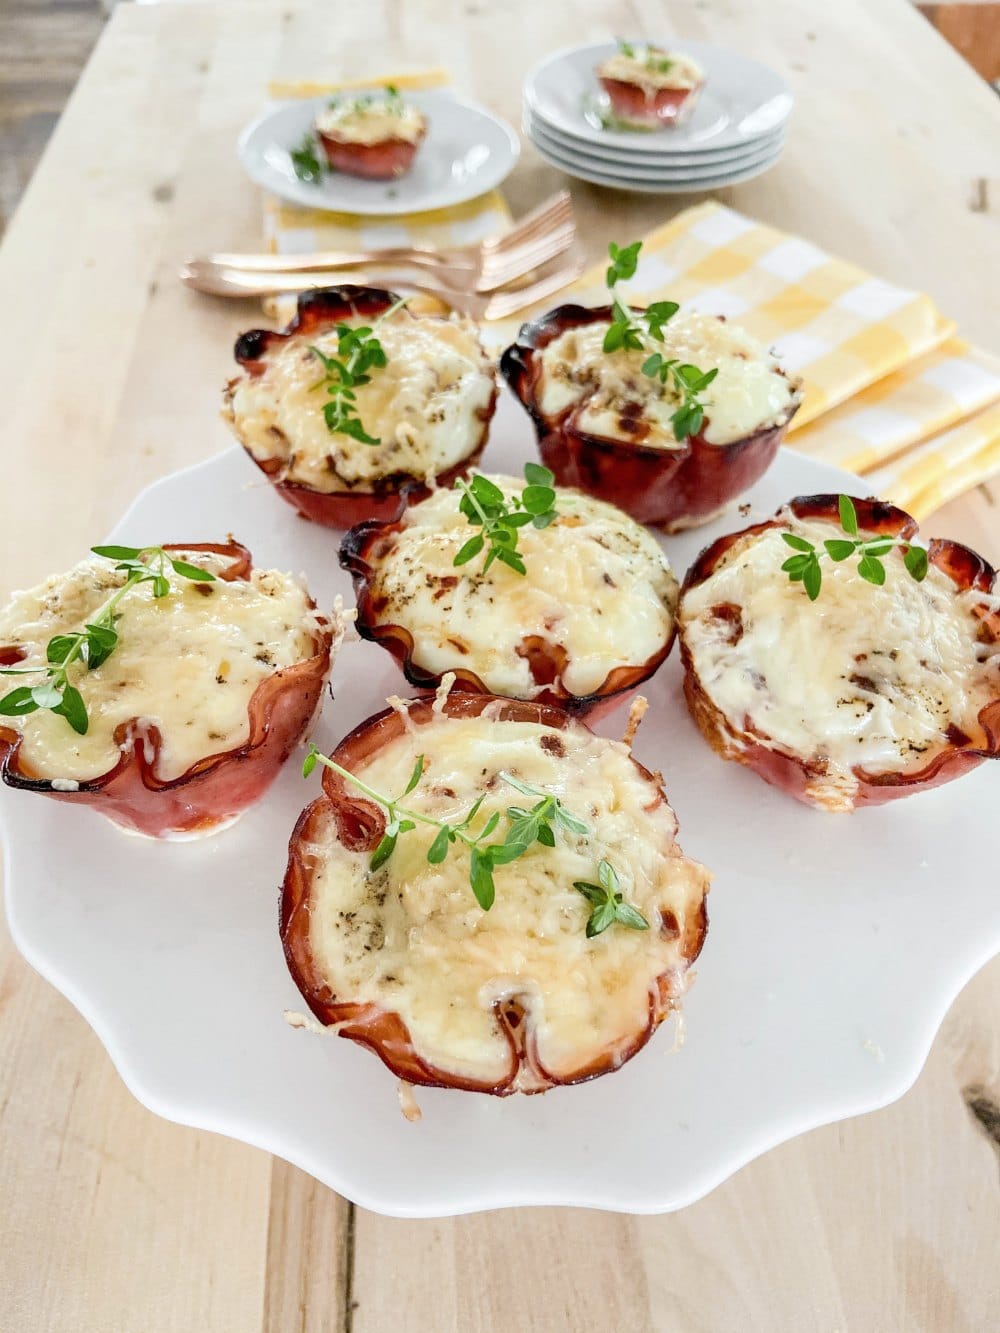 3-Ingredient Low Carb Breakfast Egg Cups. Start your day with this protein-packed low-carb on-the-go breakfast cup that is SO good! 